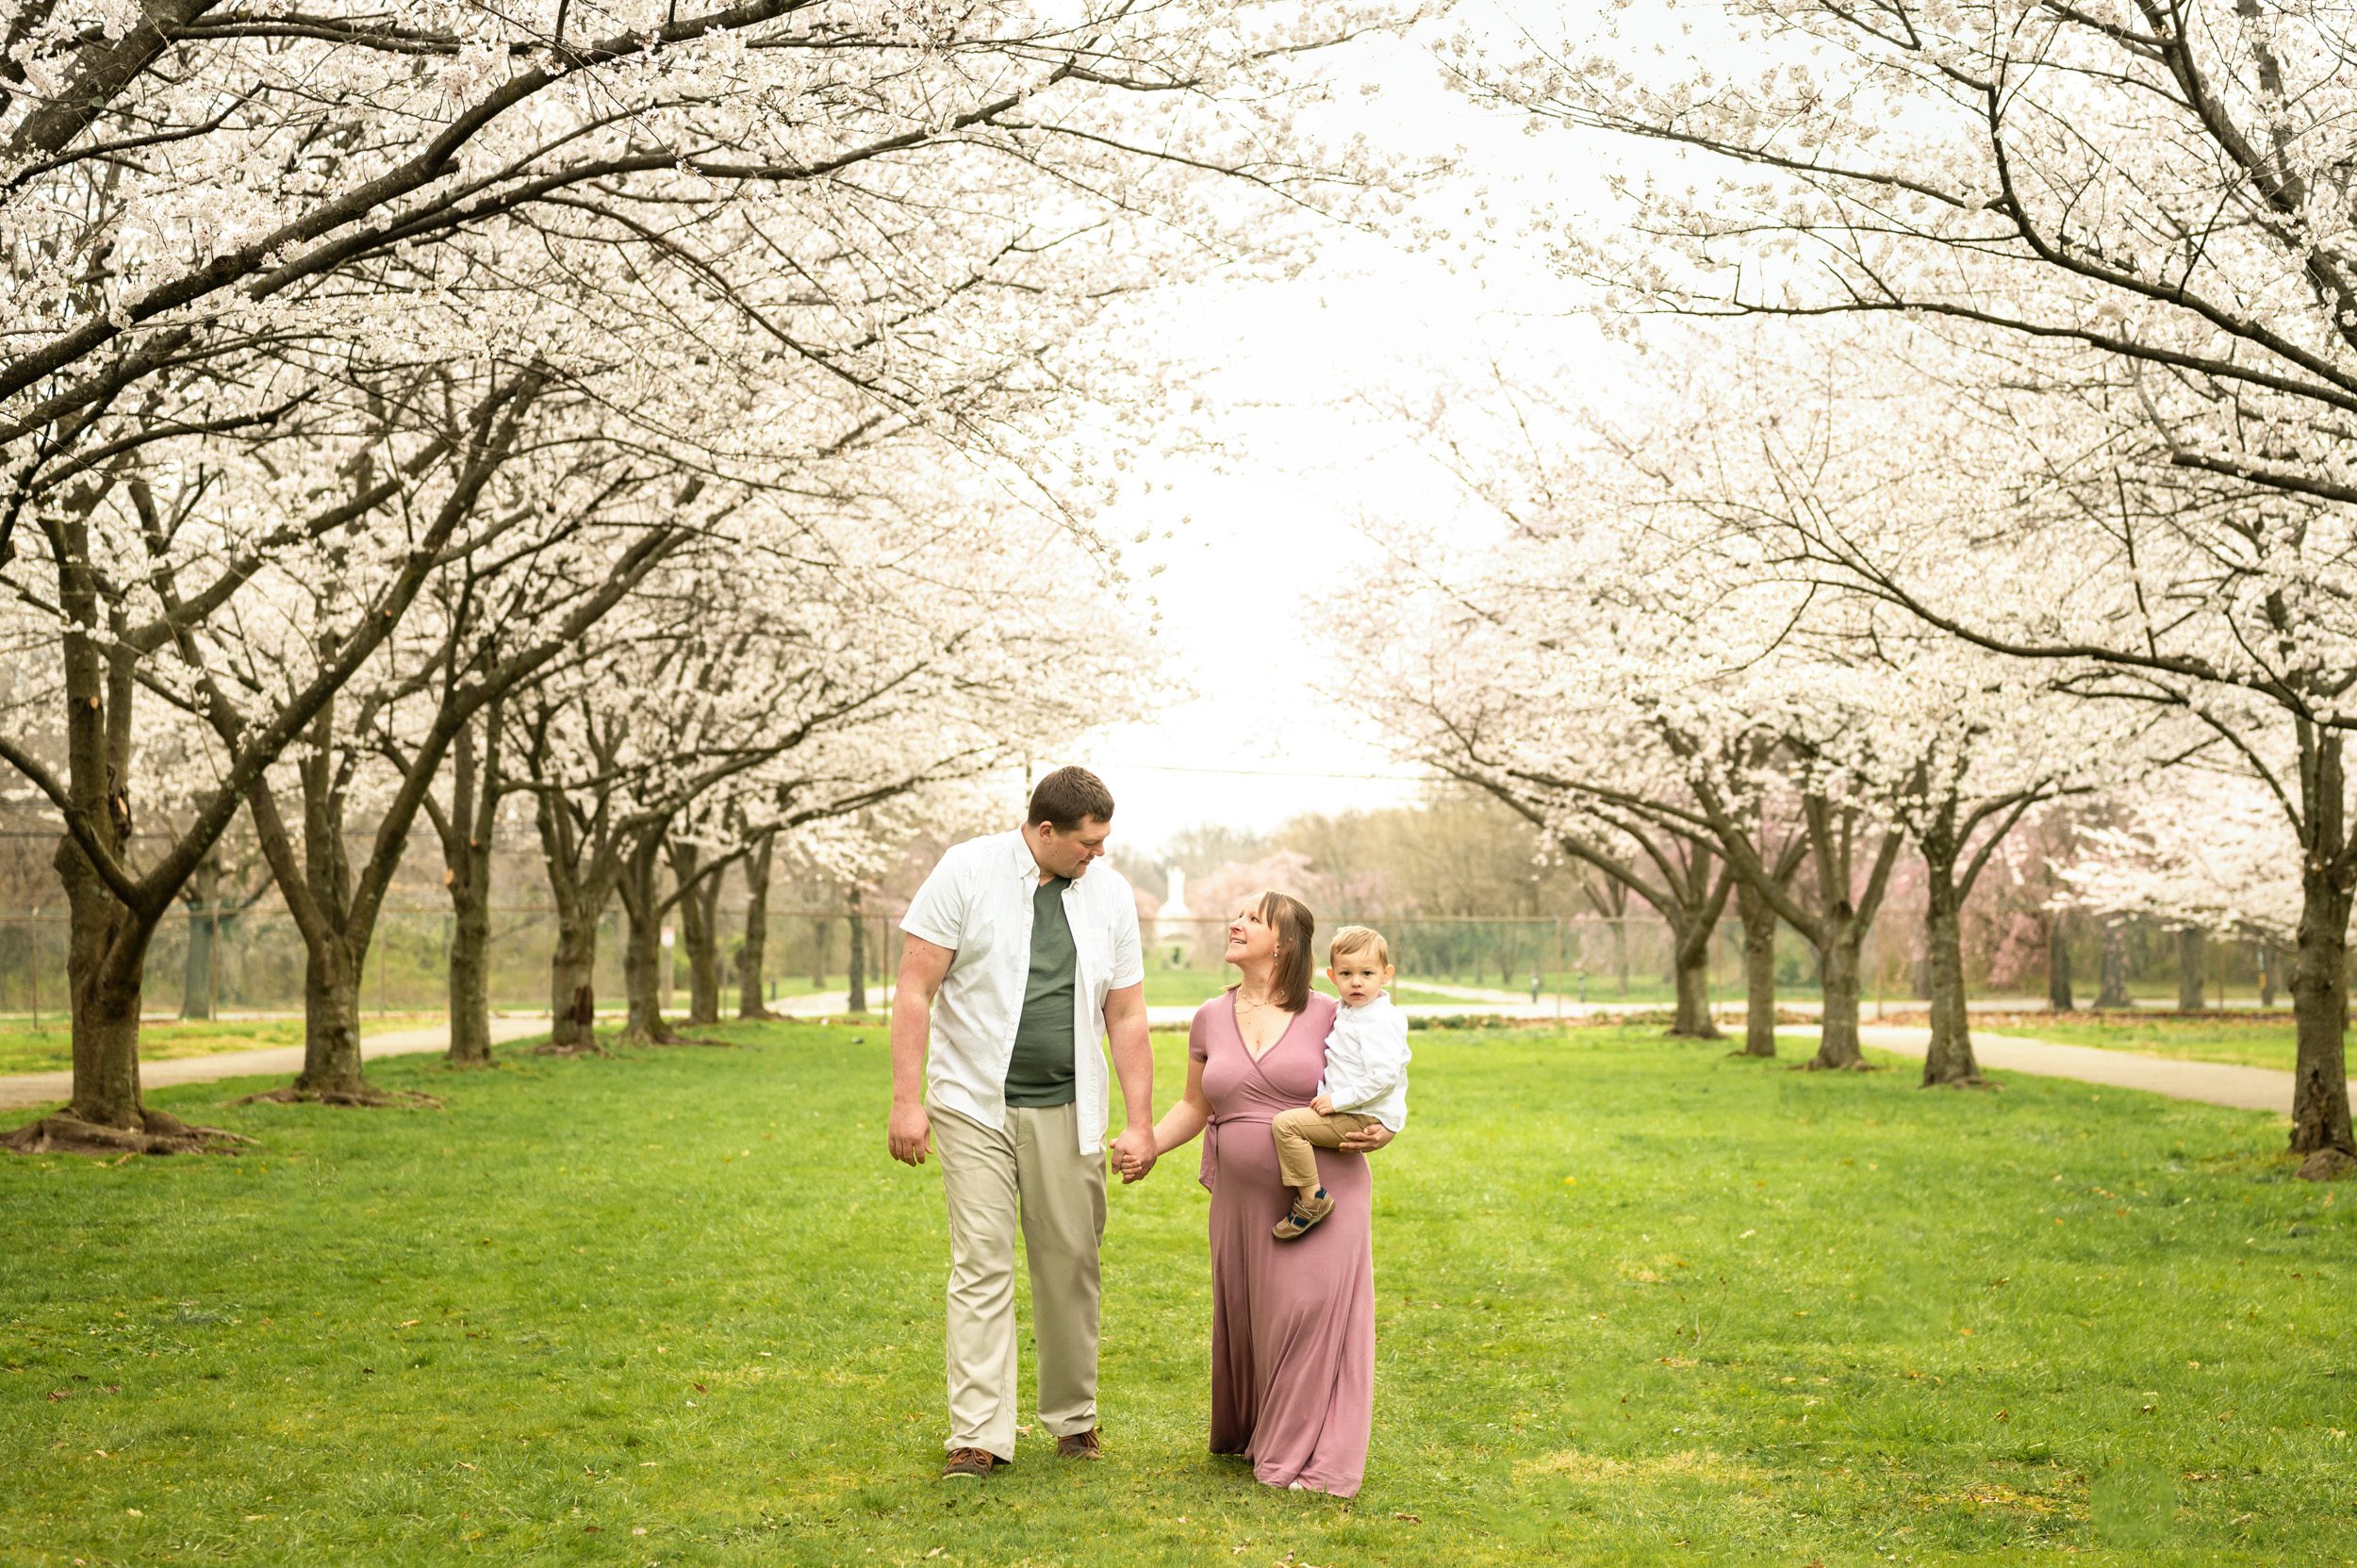 Expecting mother walking in between two rows of white cherry blossoms in bloom holding her young son on her hip and smiling at her husband during a maternity photoshoot